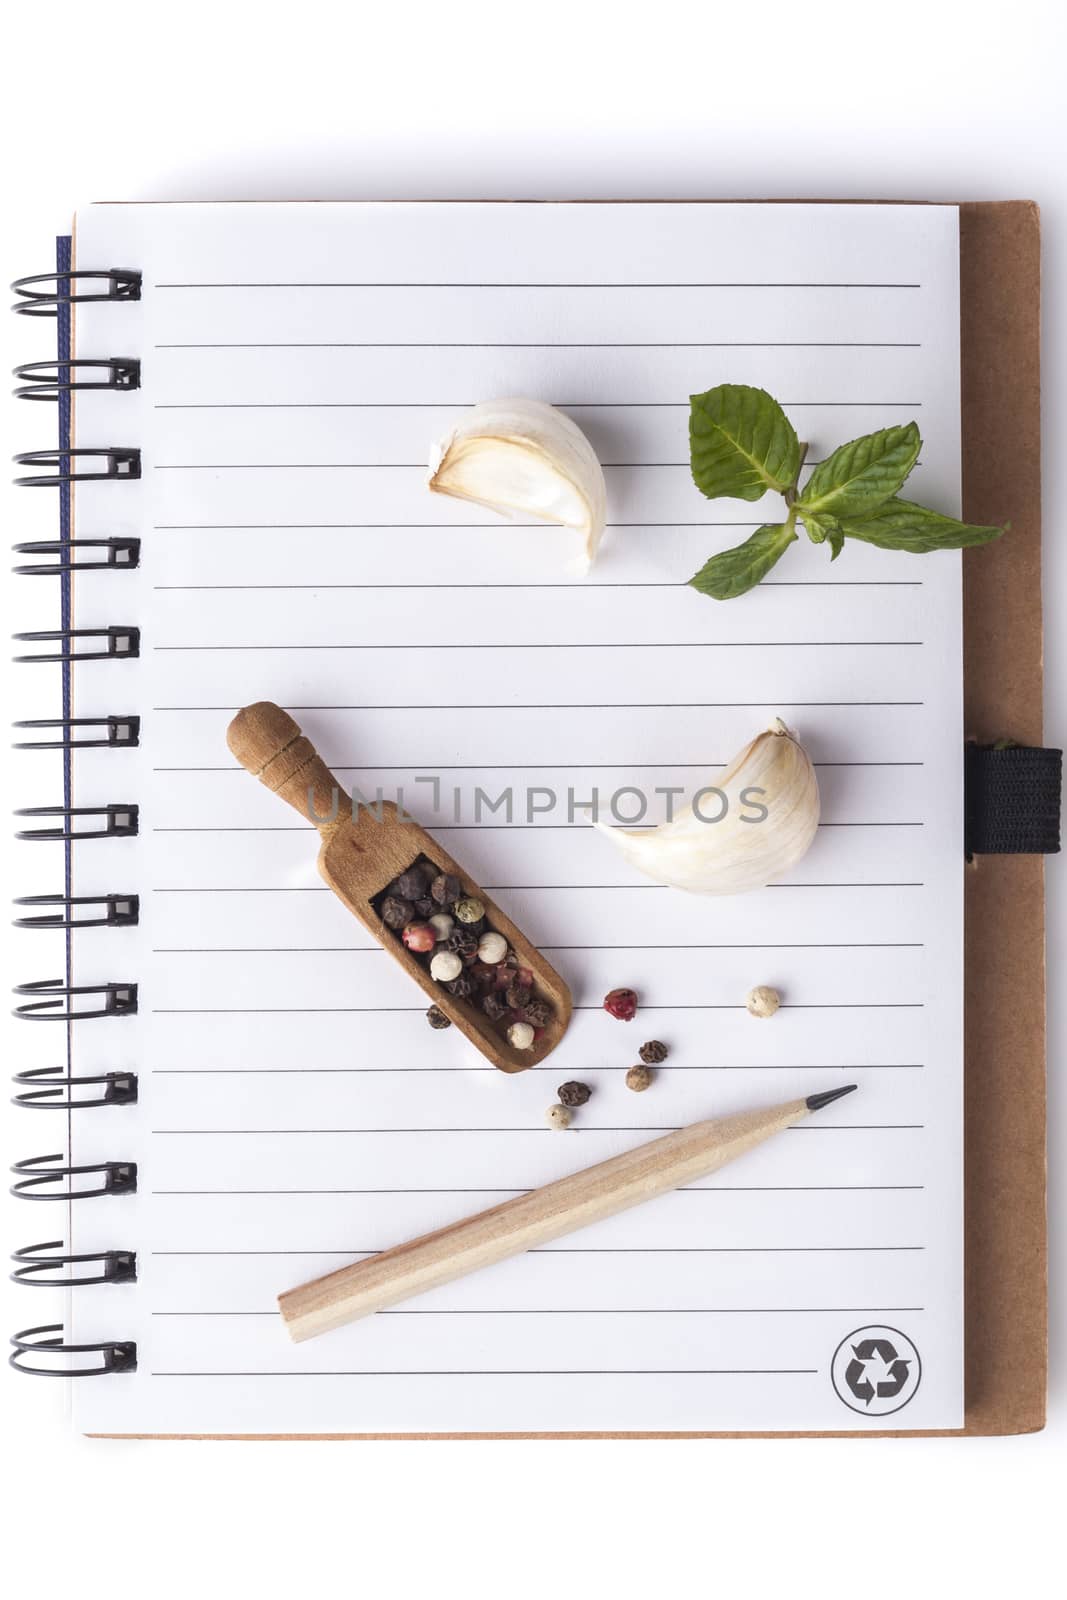 Recipe Notebook and Ingredients by orcearo